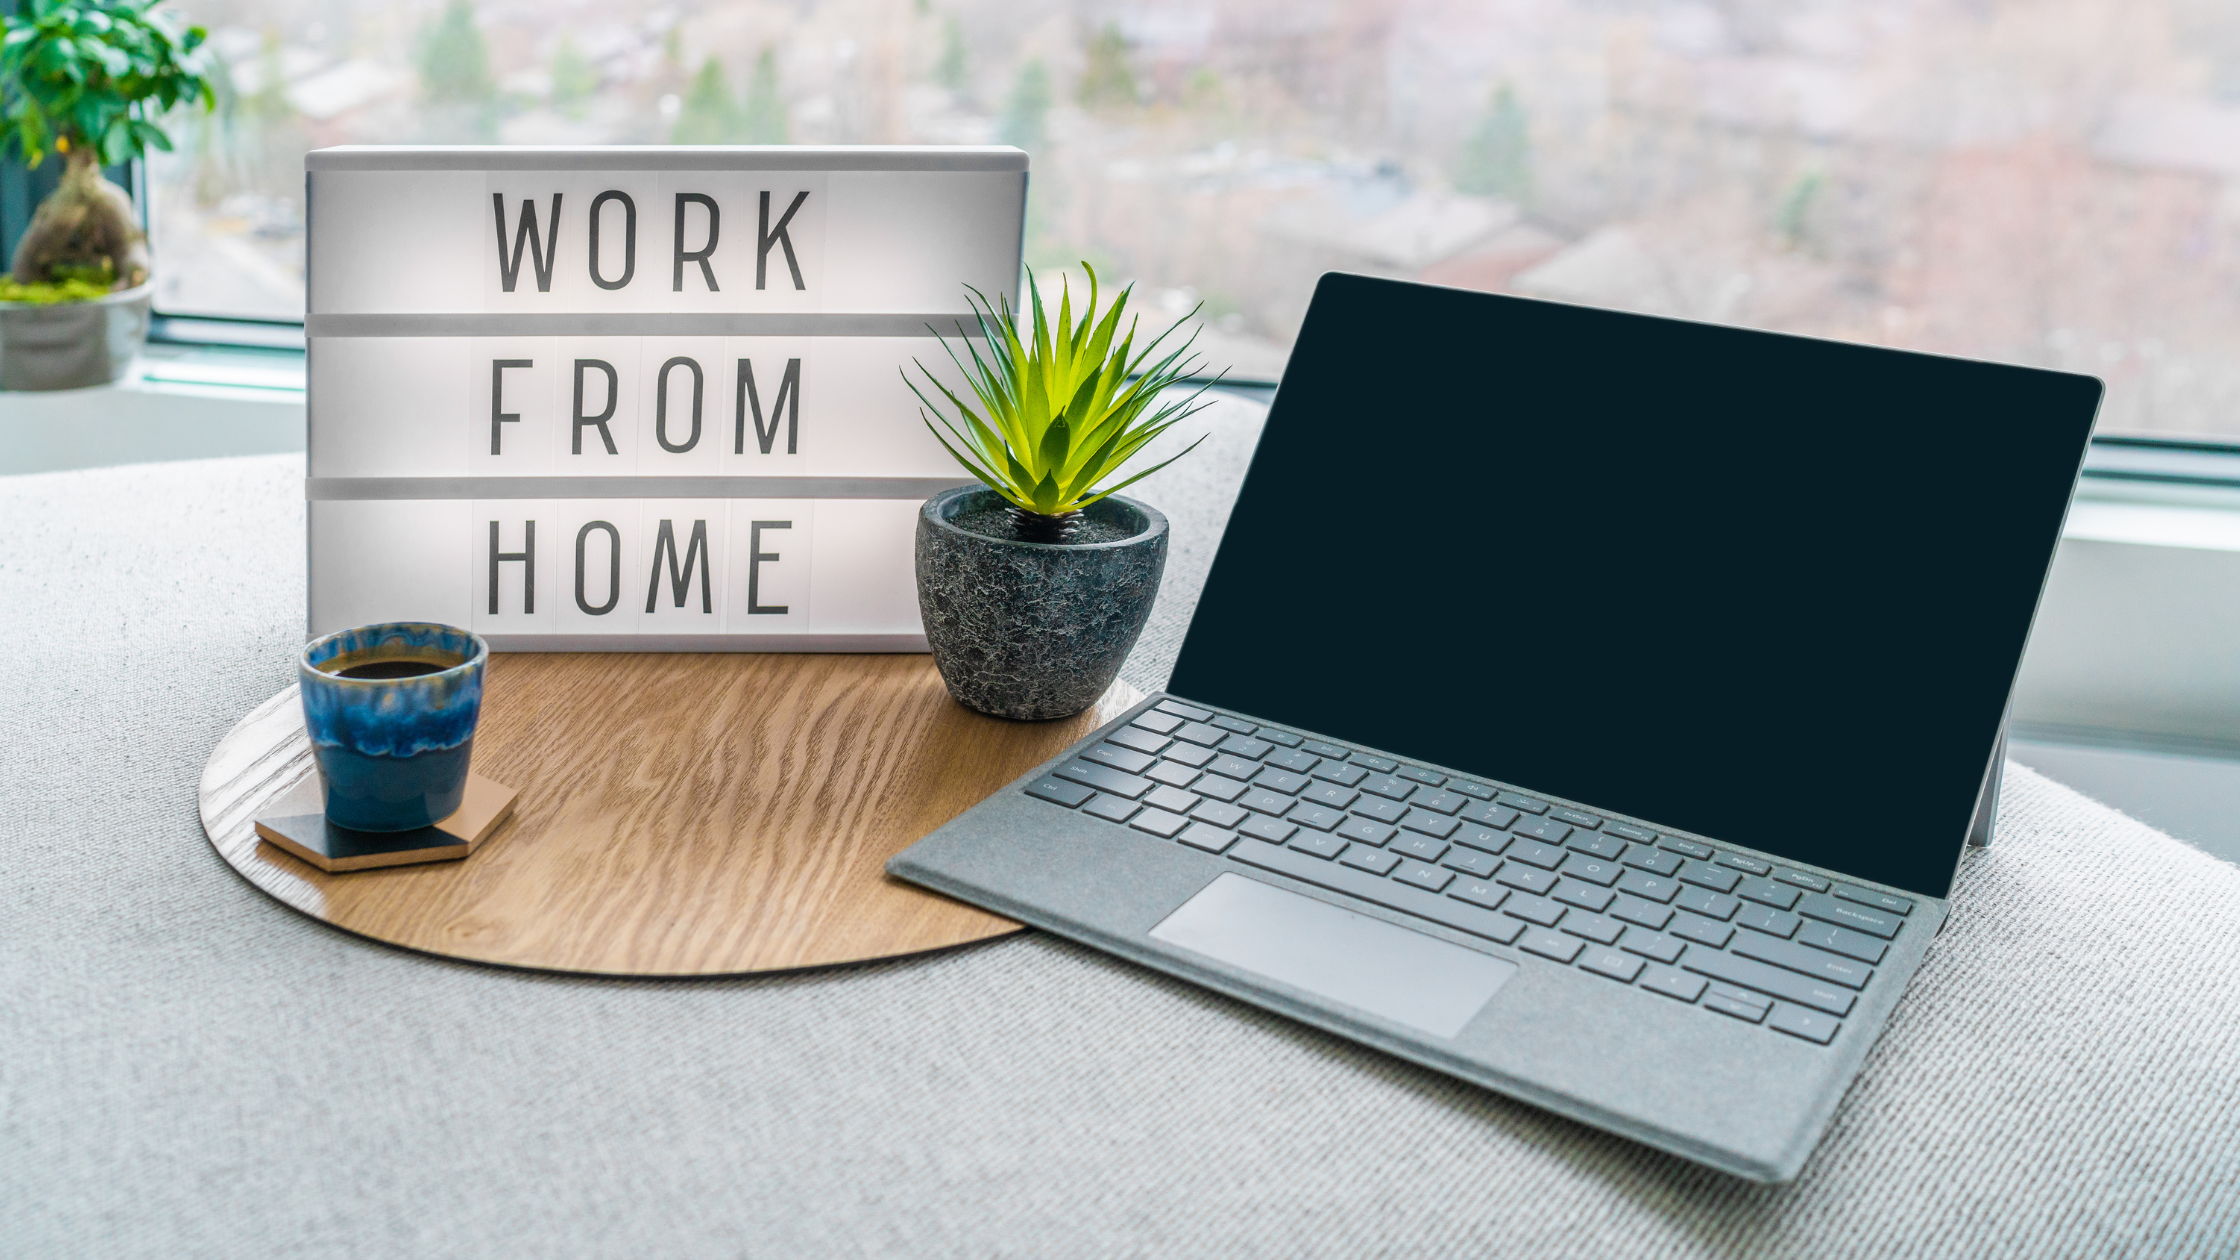 Working from home: A checklist to support your mental health